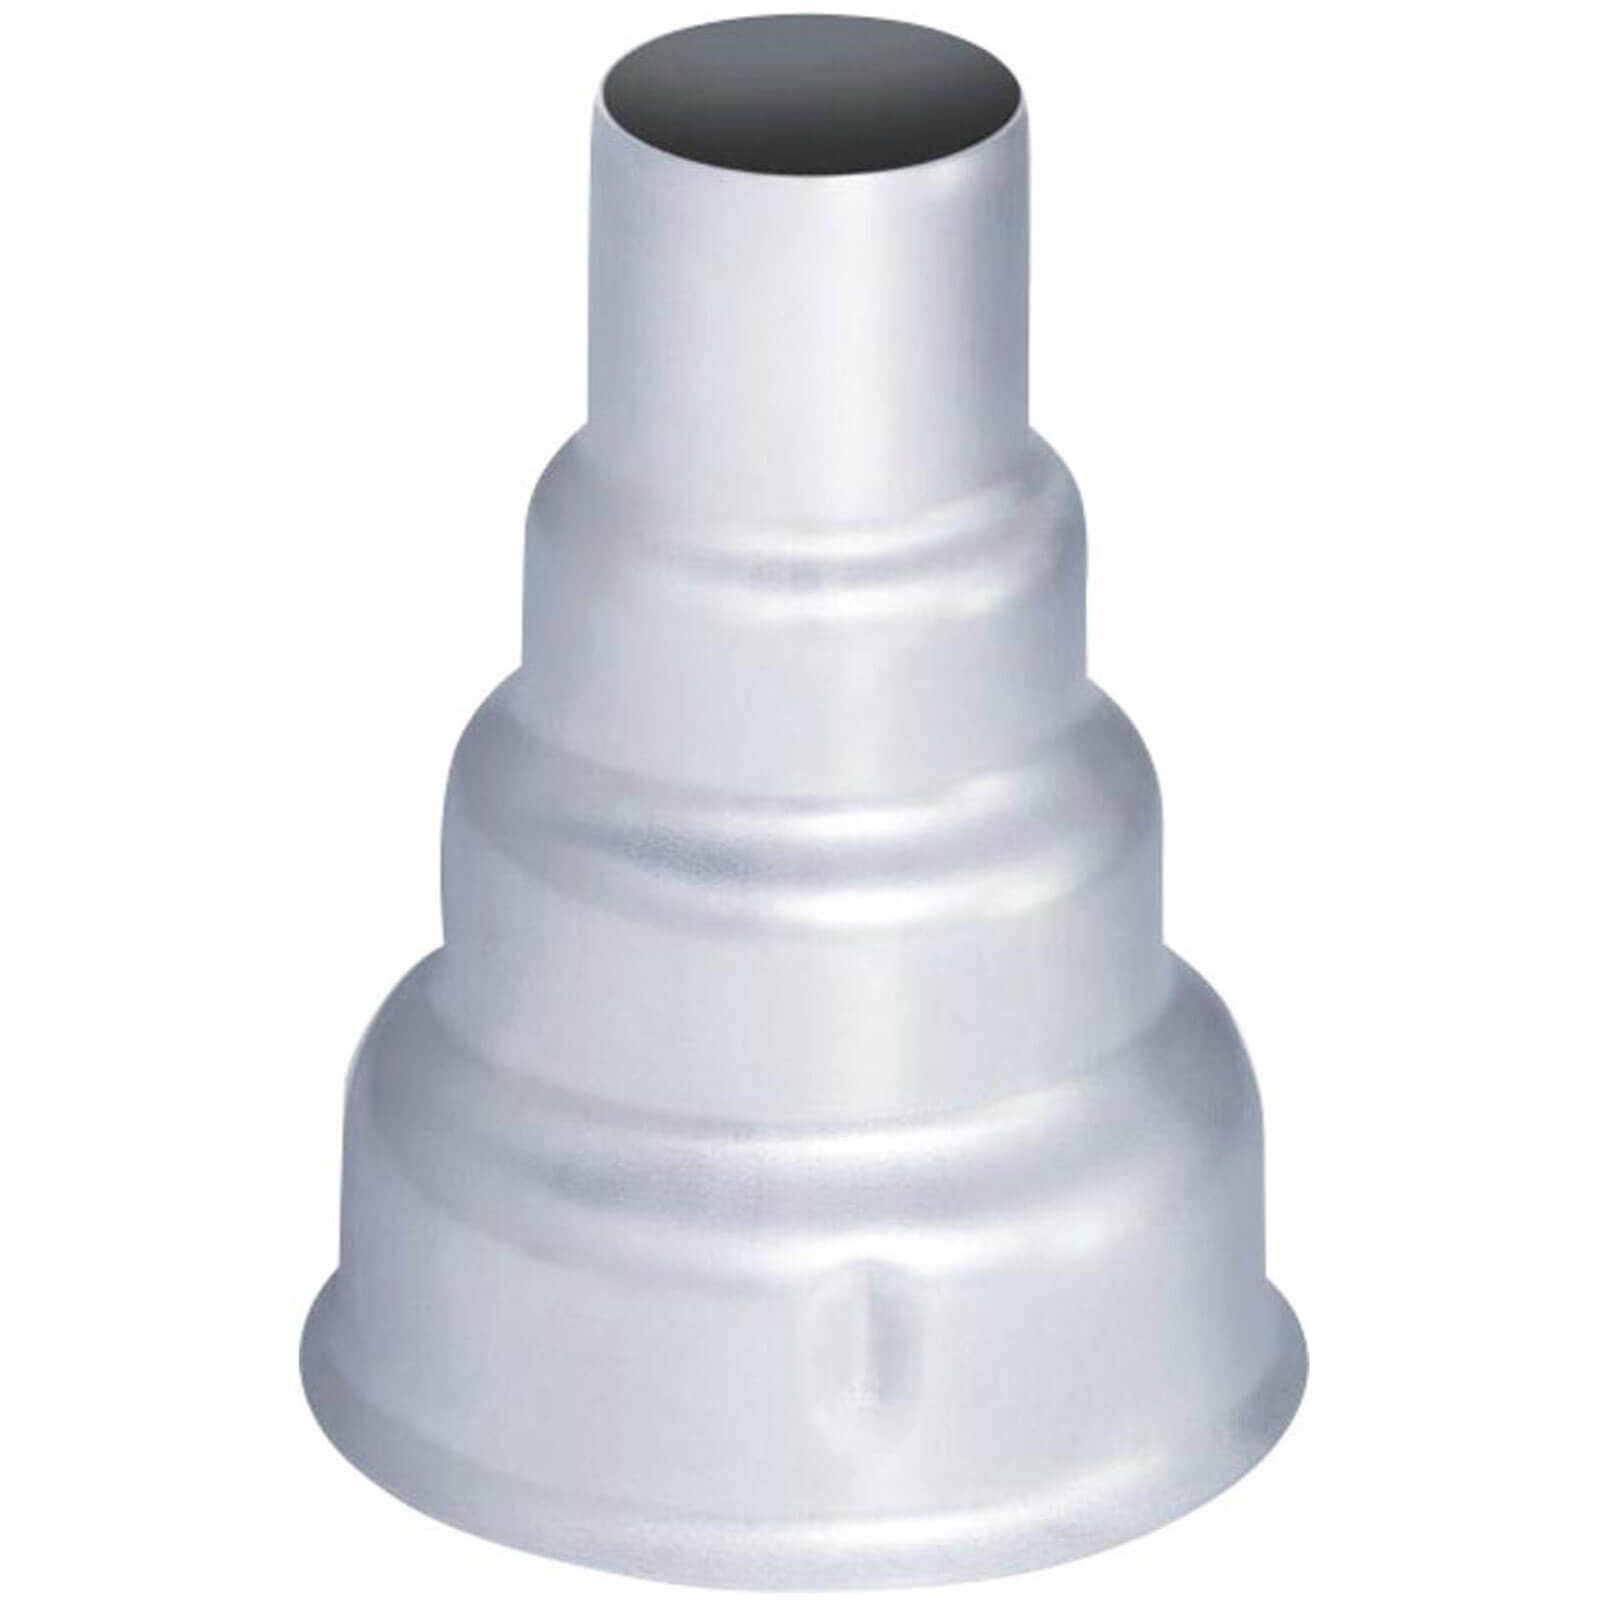 Image of Steinel Reduction Nozzle for HL Models and HG 2120 E, 2320 E and 2220 E 14mm